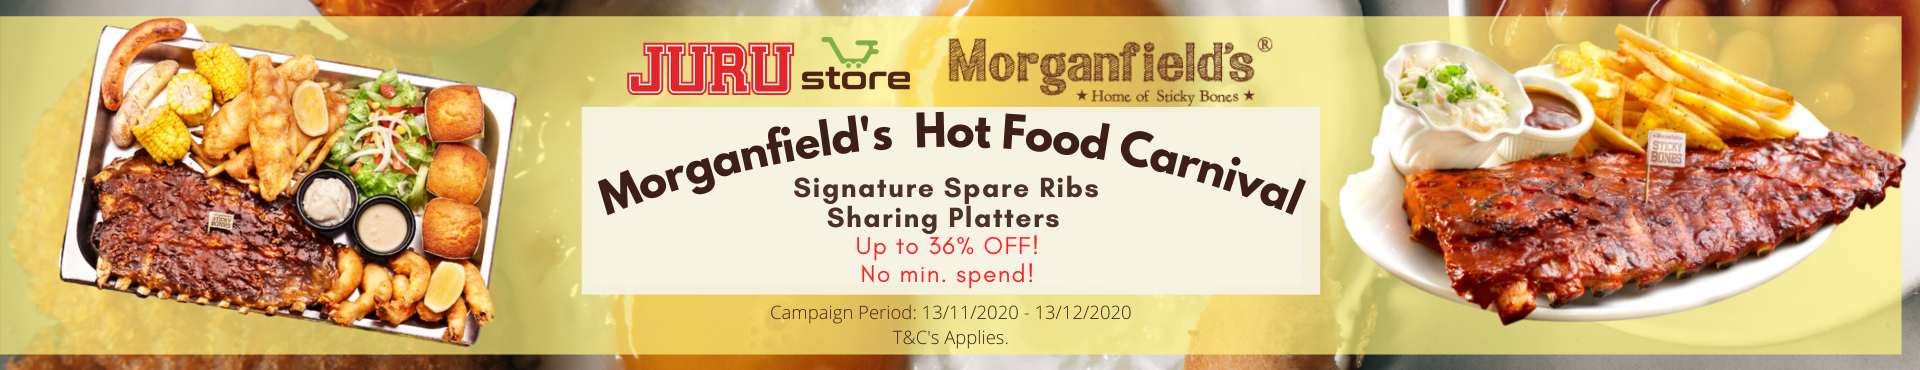 Morganfield’s Hot Food Carnival